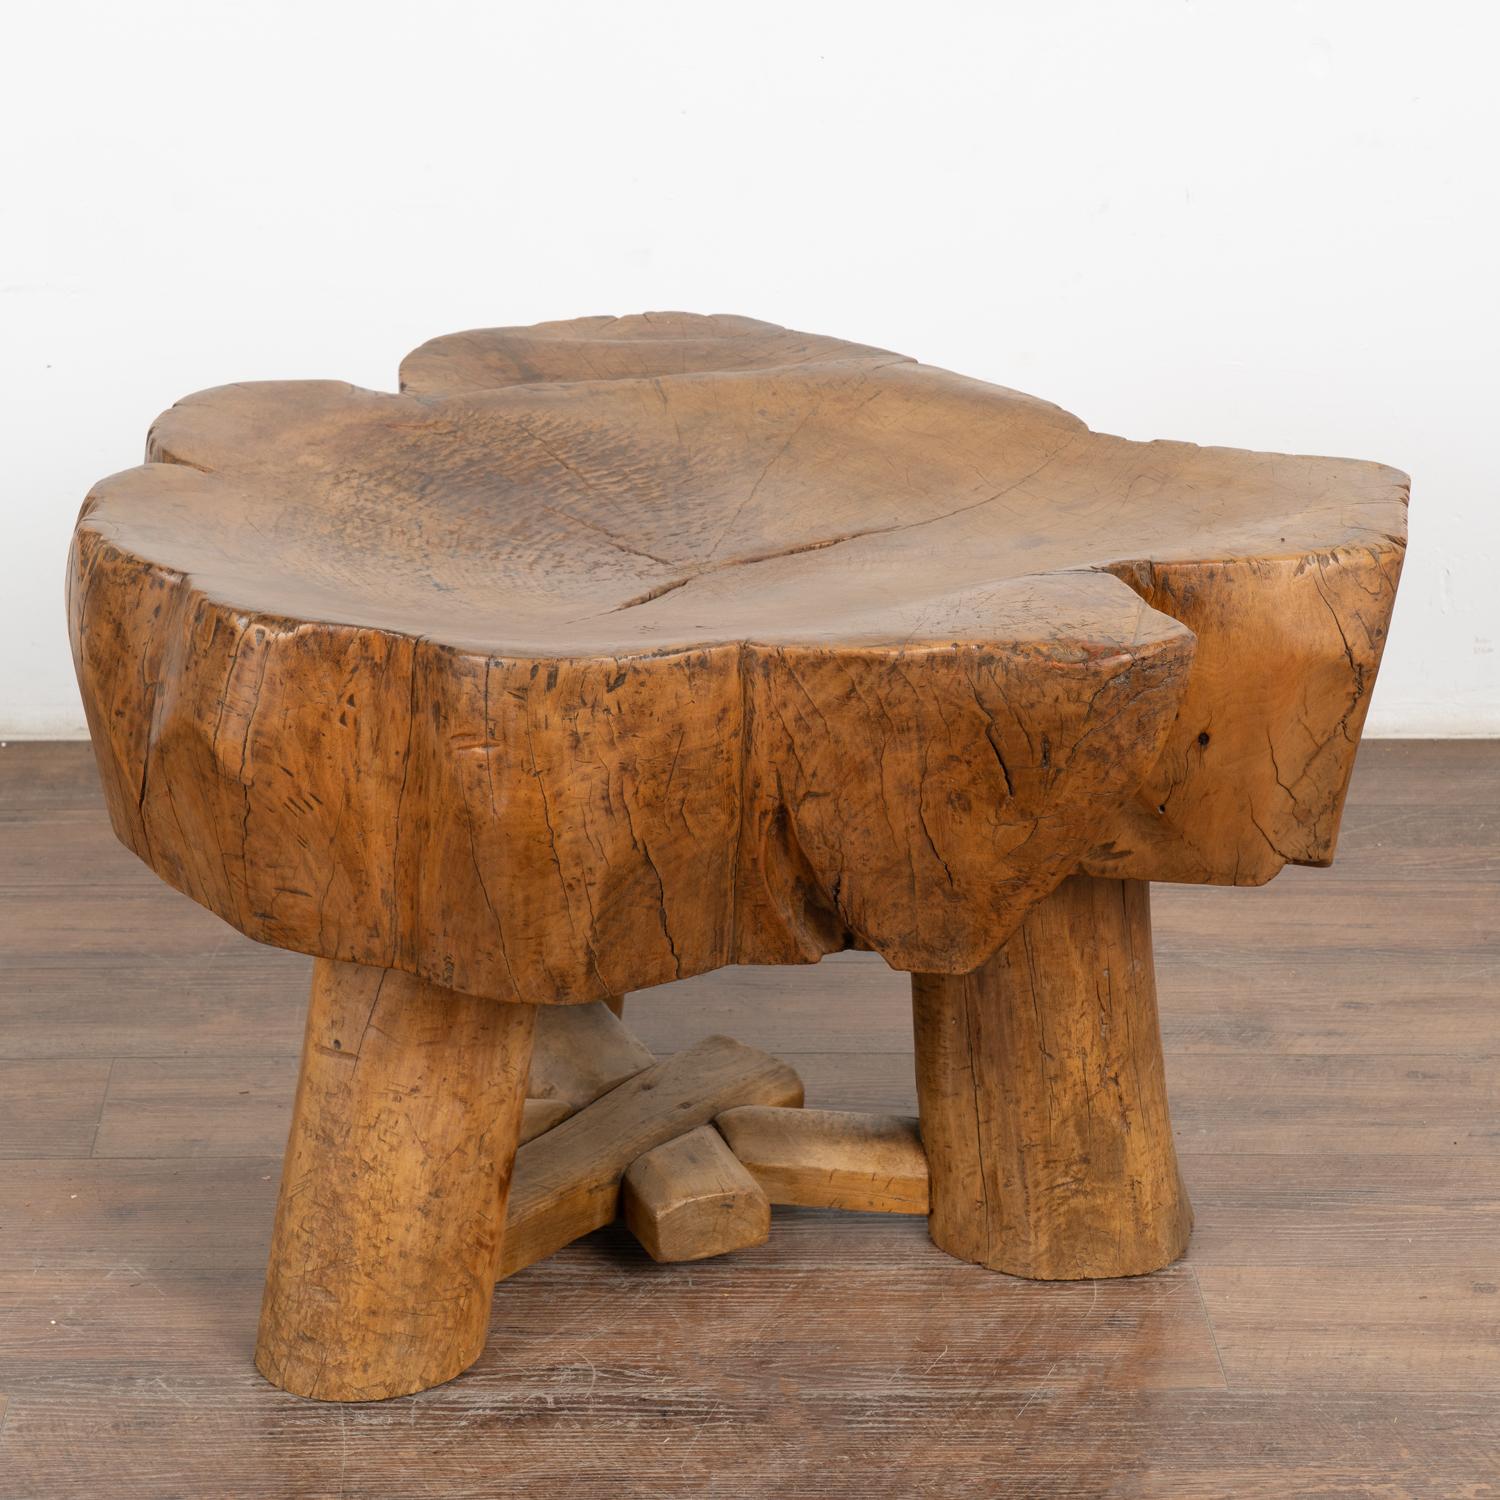 Rustic Slab Wood Round Coffee Table, China circa 1890 For Sale 5